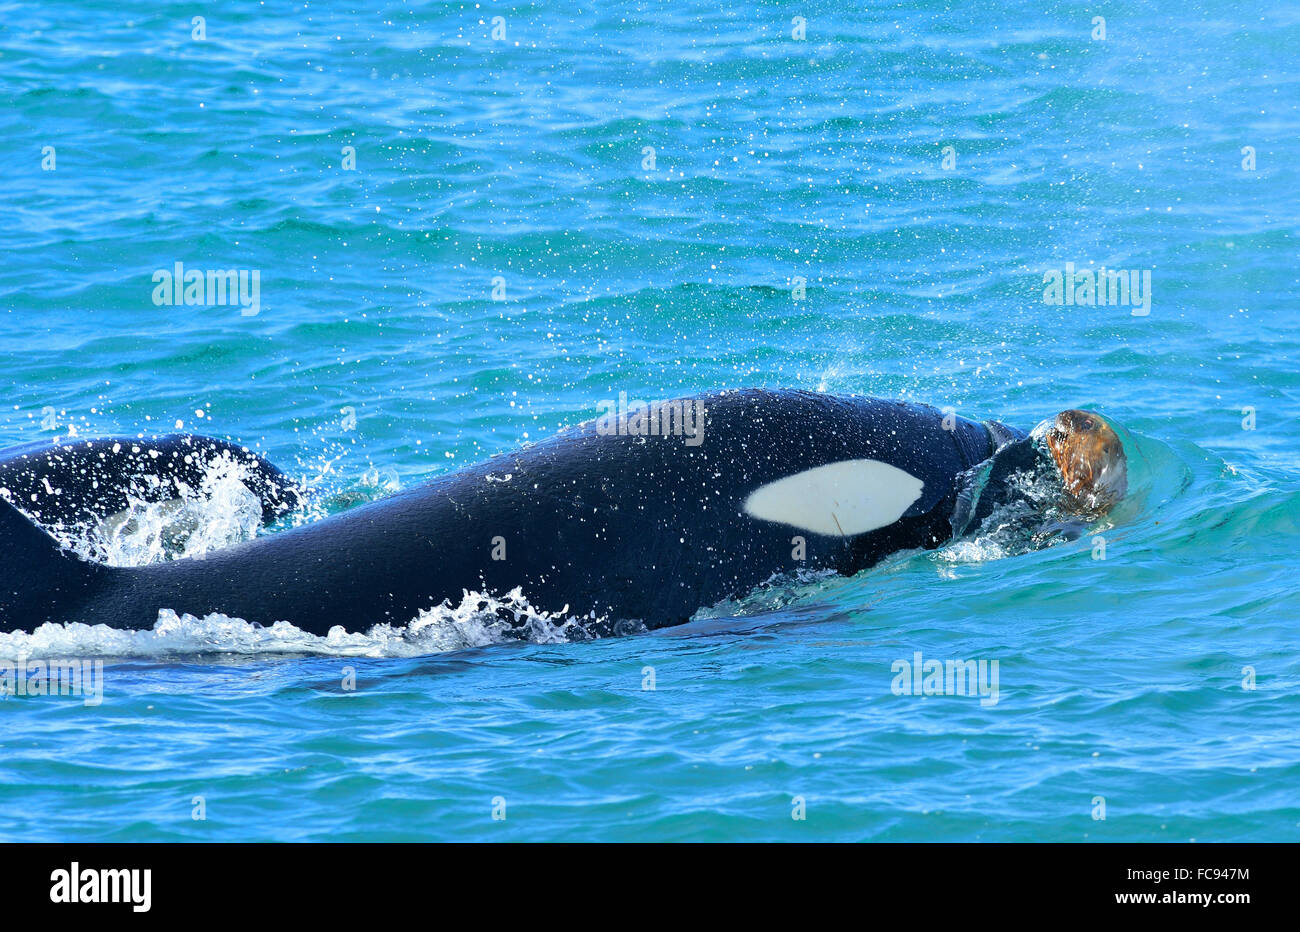 Orca (Orcinus orca) (killer whale) attacking South American sea lion (Otaria flavescens), Patagonia, Argentina, South America Stock Photo